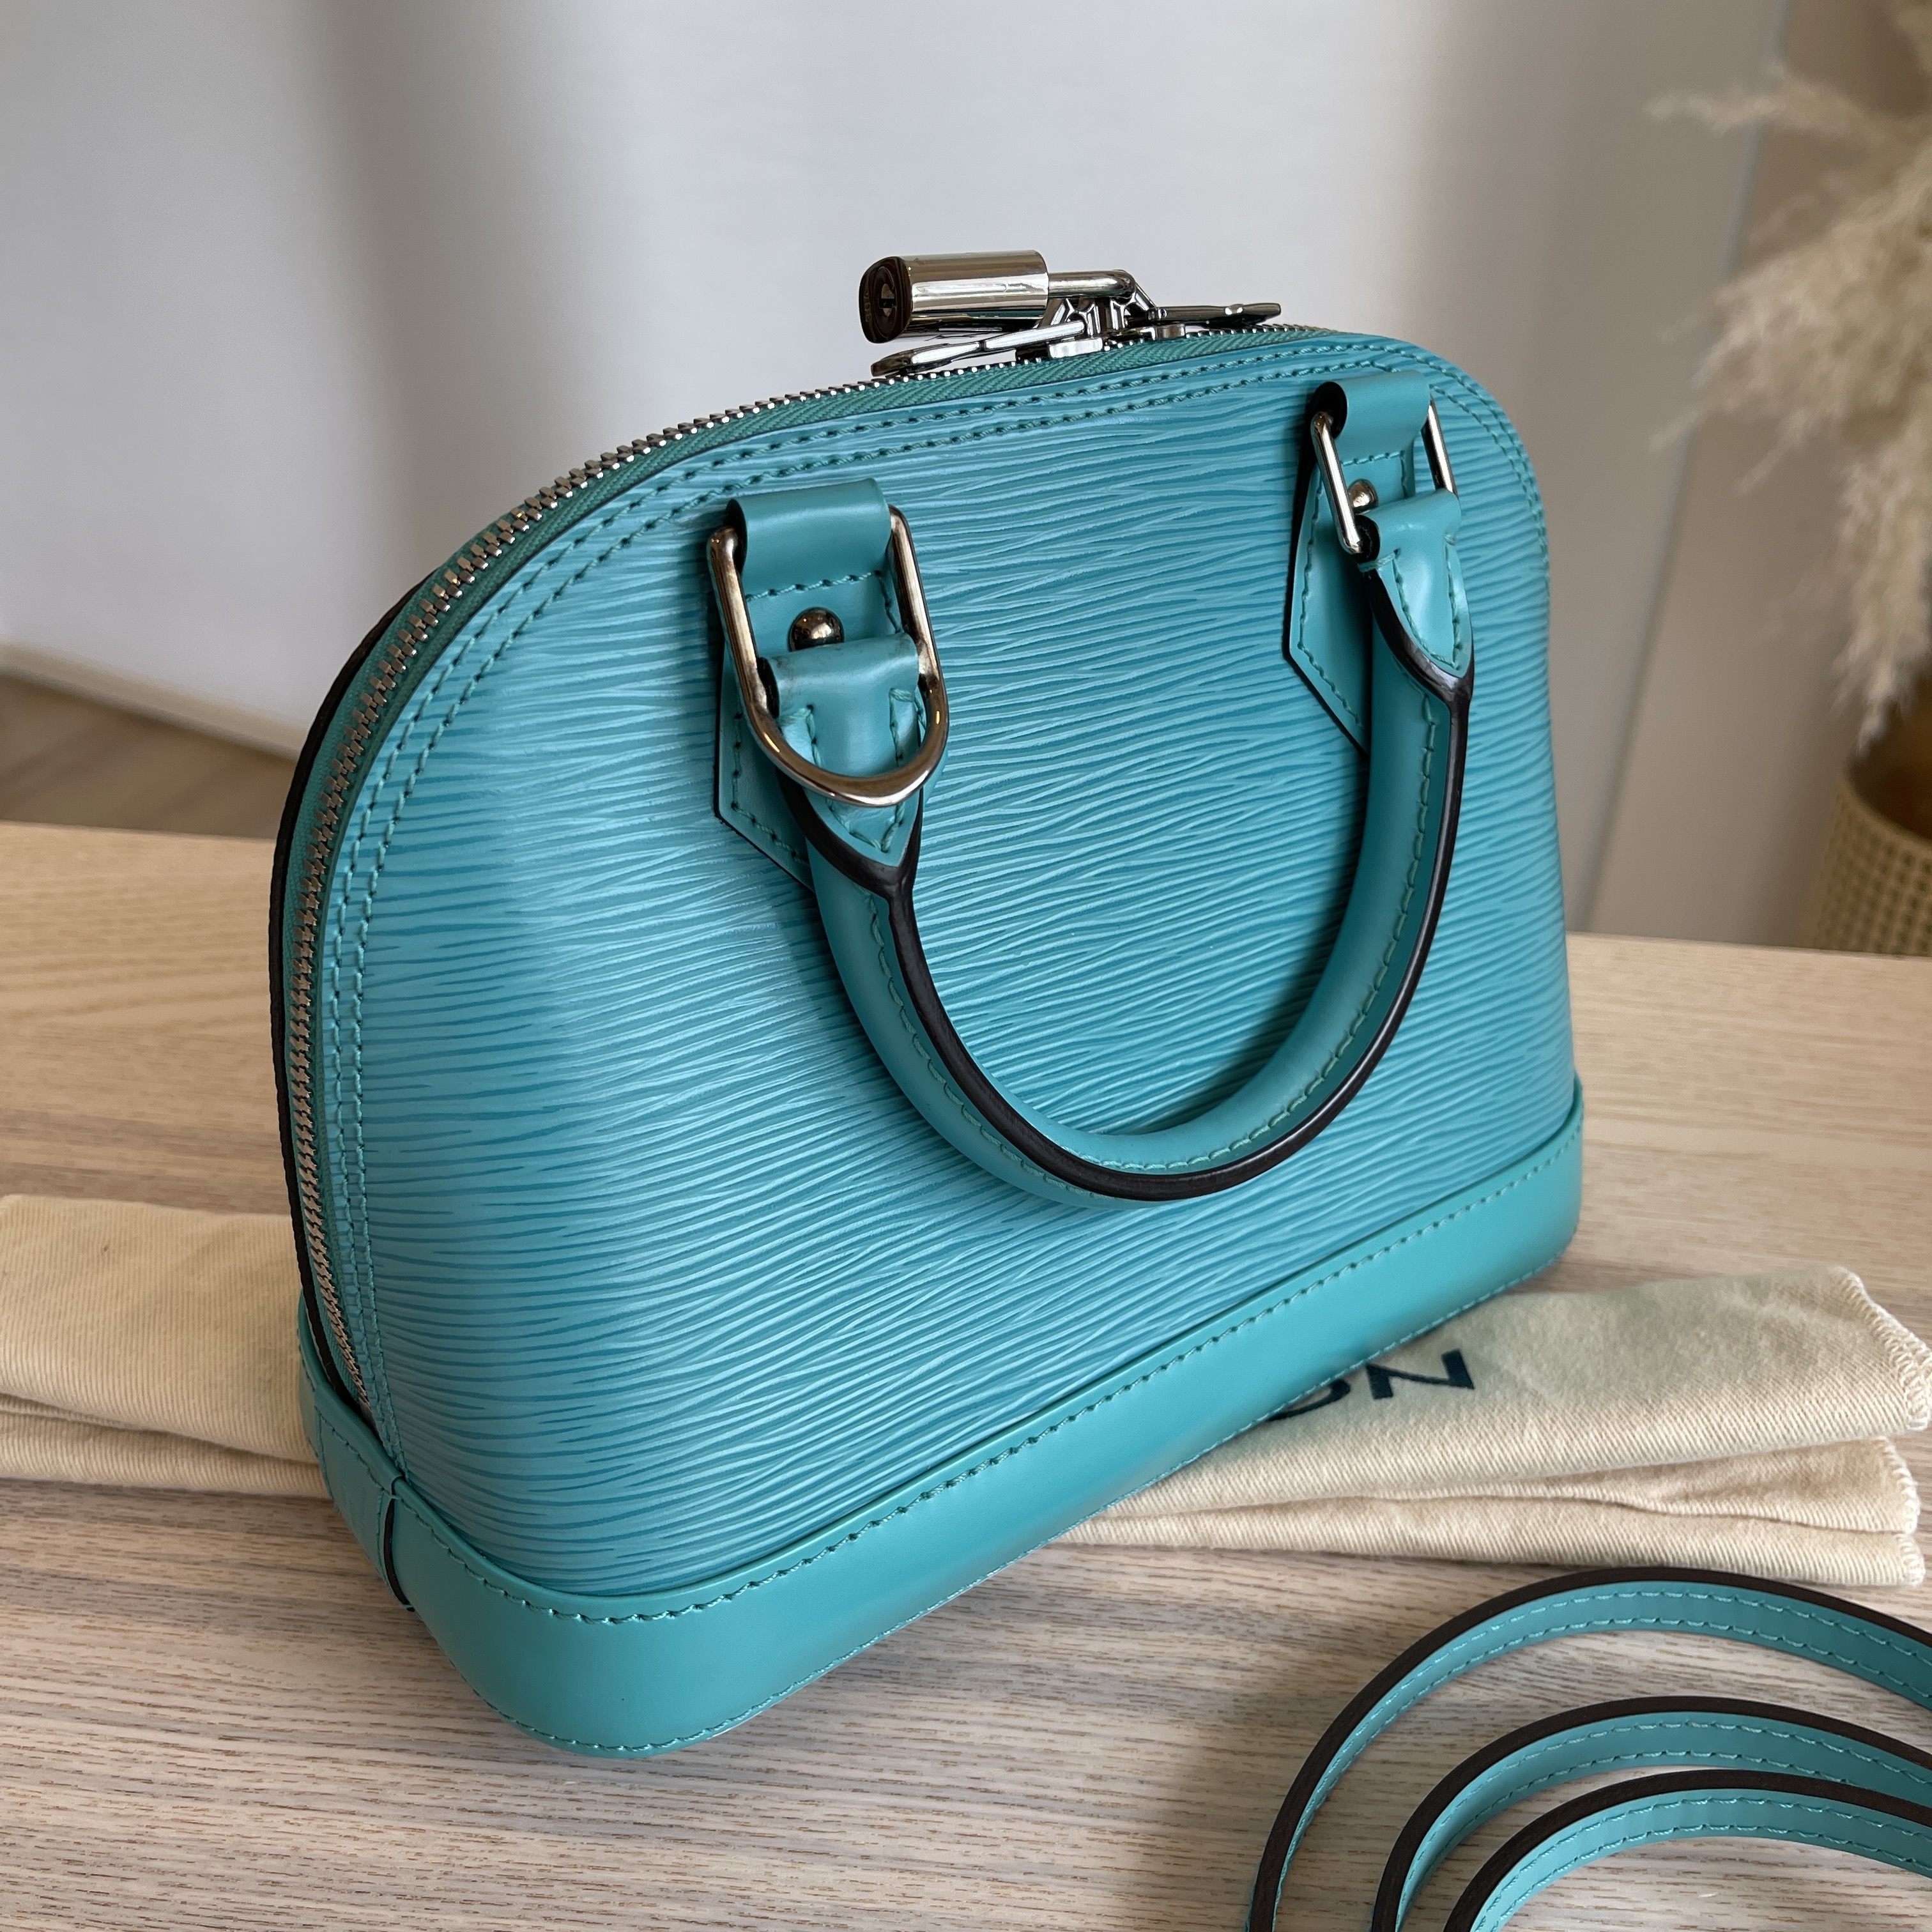 Louis Vuitton Alma BB in Turquoise Epi Leather - SOLD